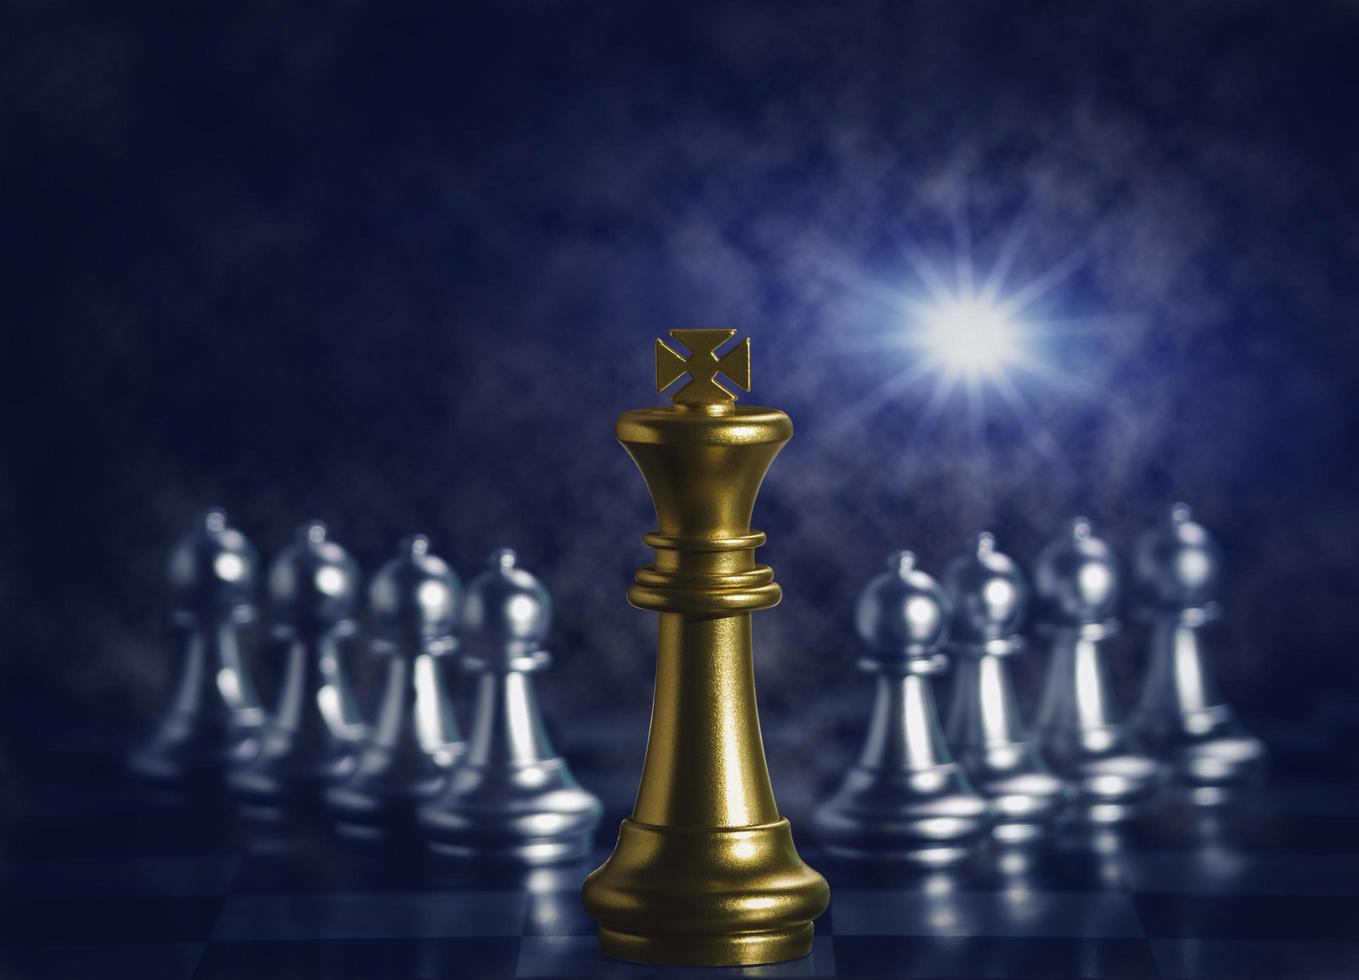 Golden king chess is surrounded by falling around silver chess pieces  to fighting with teamwork to victory, business strategy concept and leader and teamwork concept for success. photo